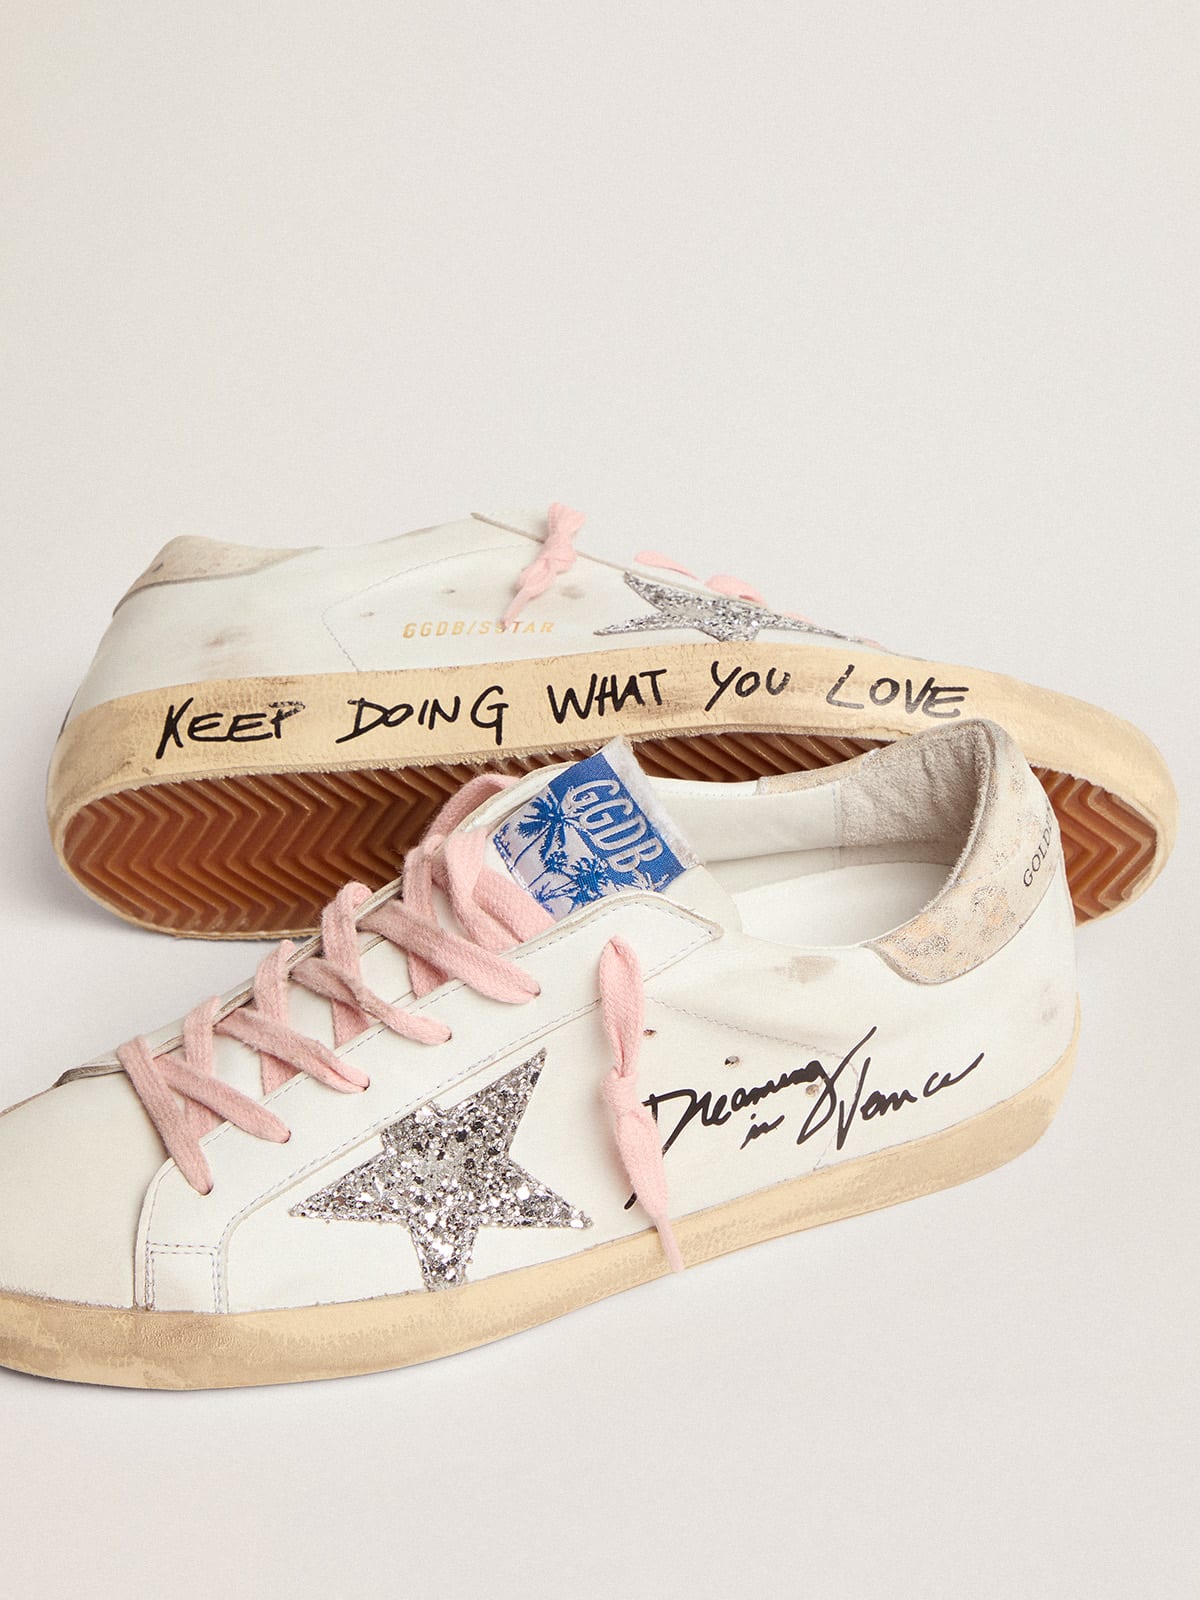 Golden Goose - Super-Star sneakers with silver glitter star and leopard-print leather heel tab in 